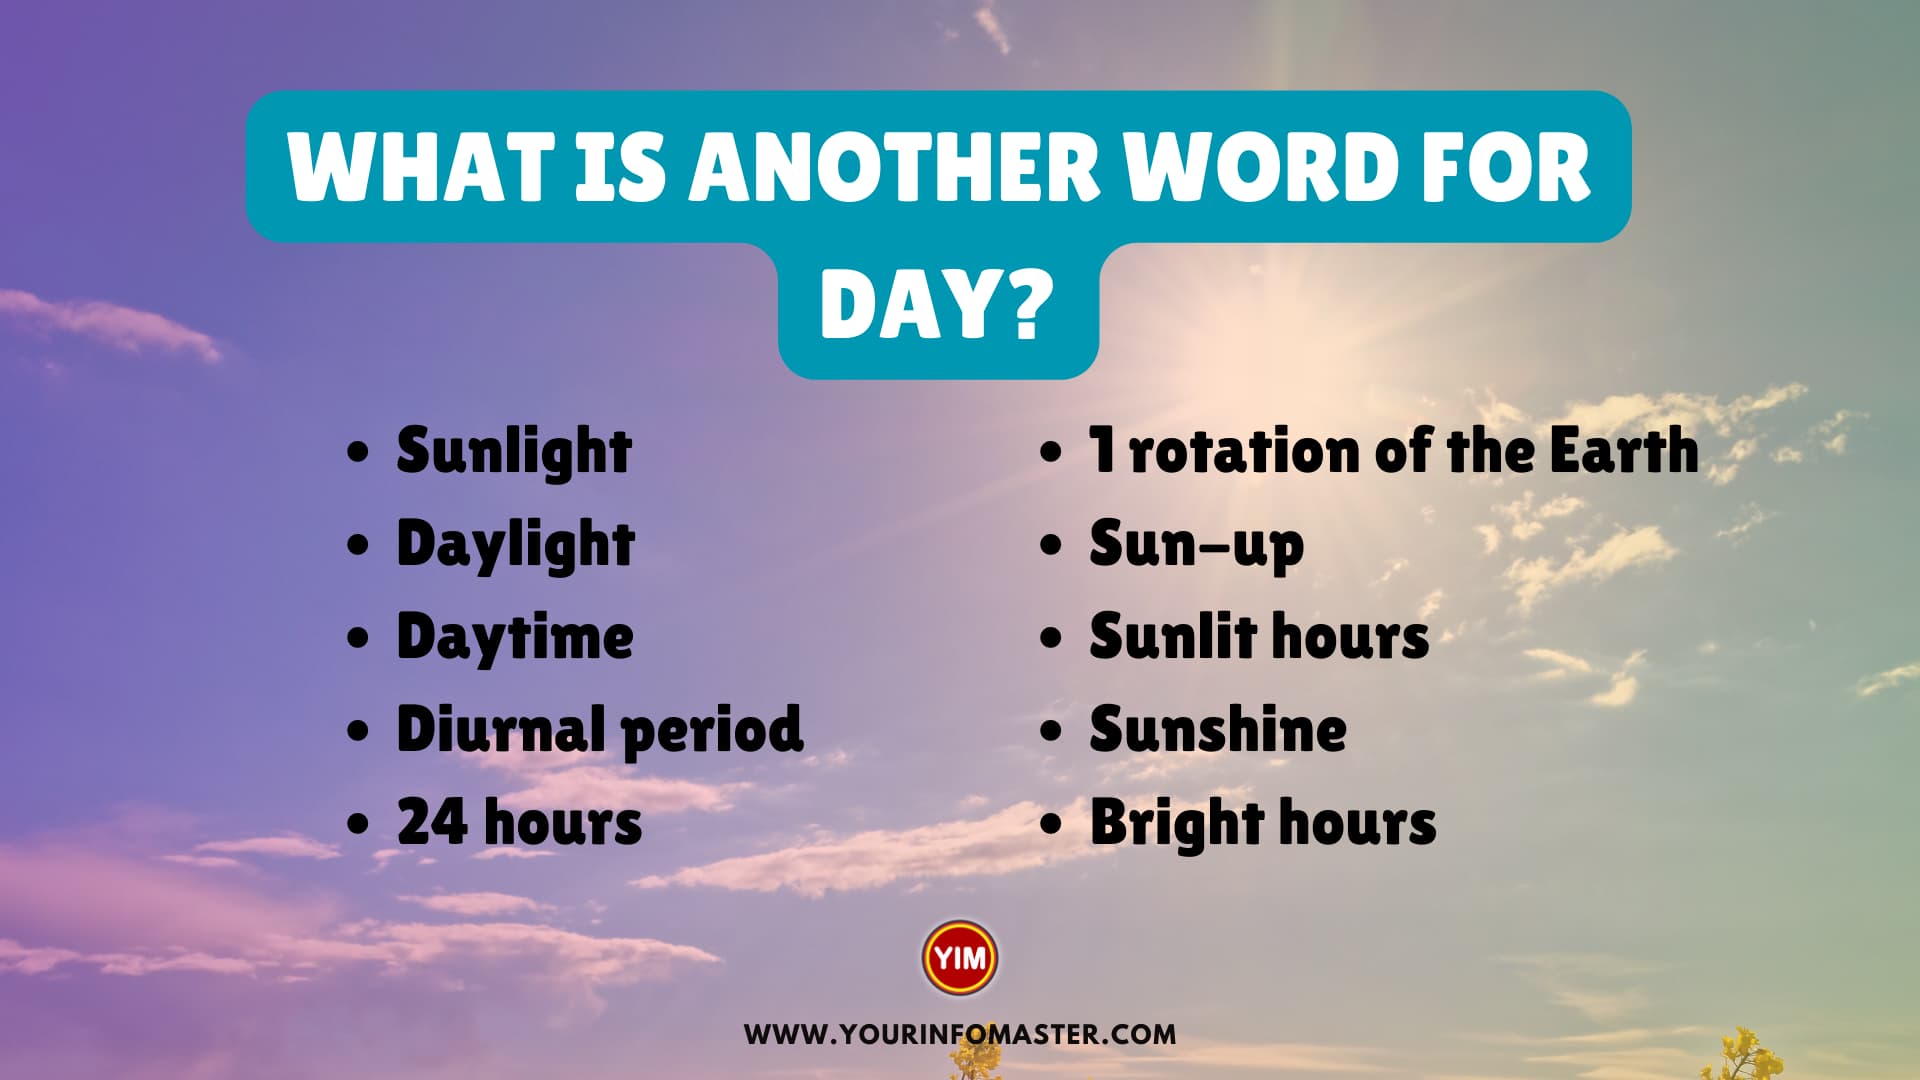 What is another word for Day